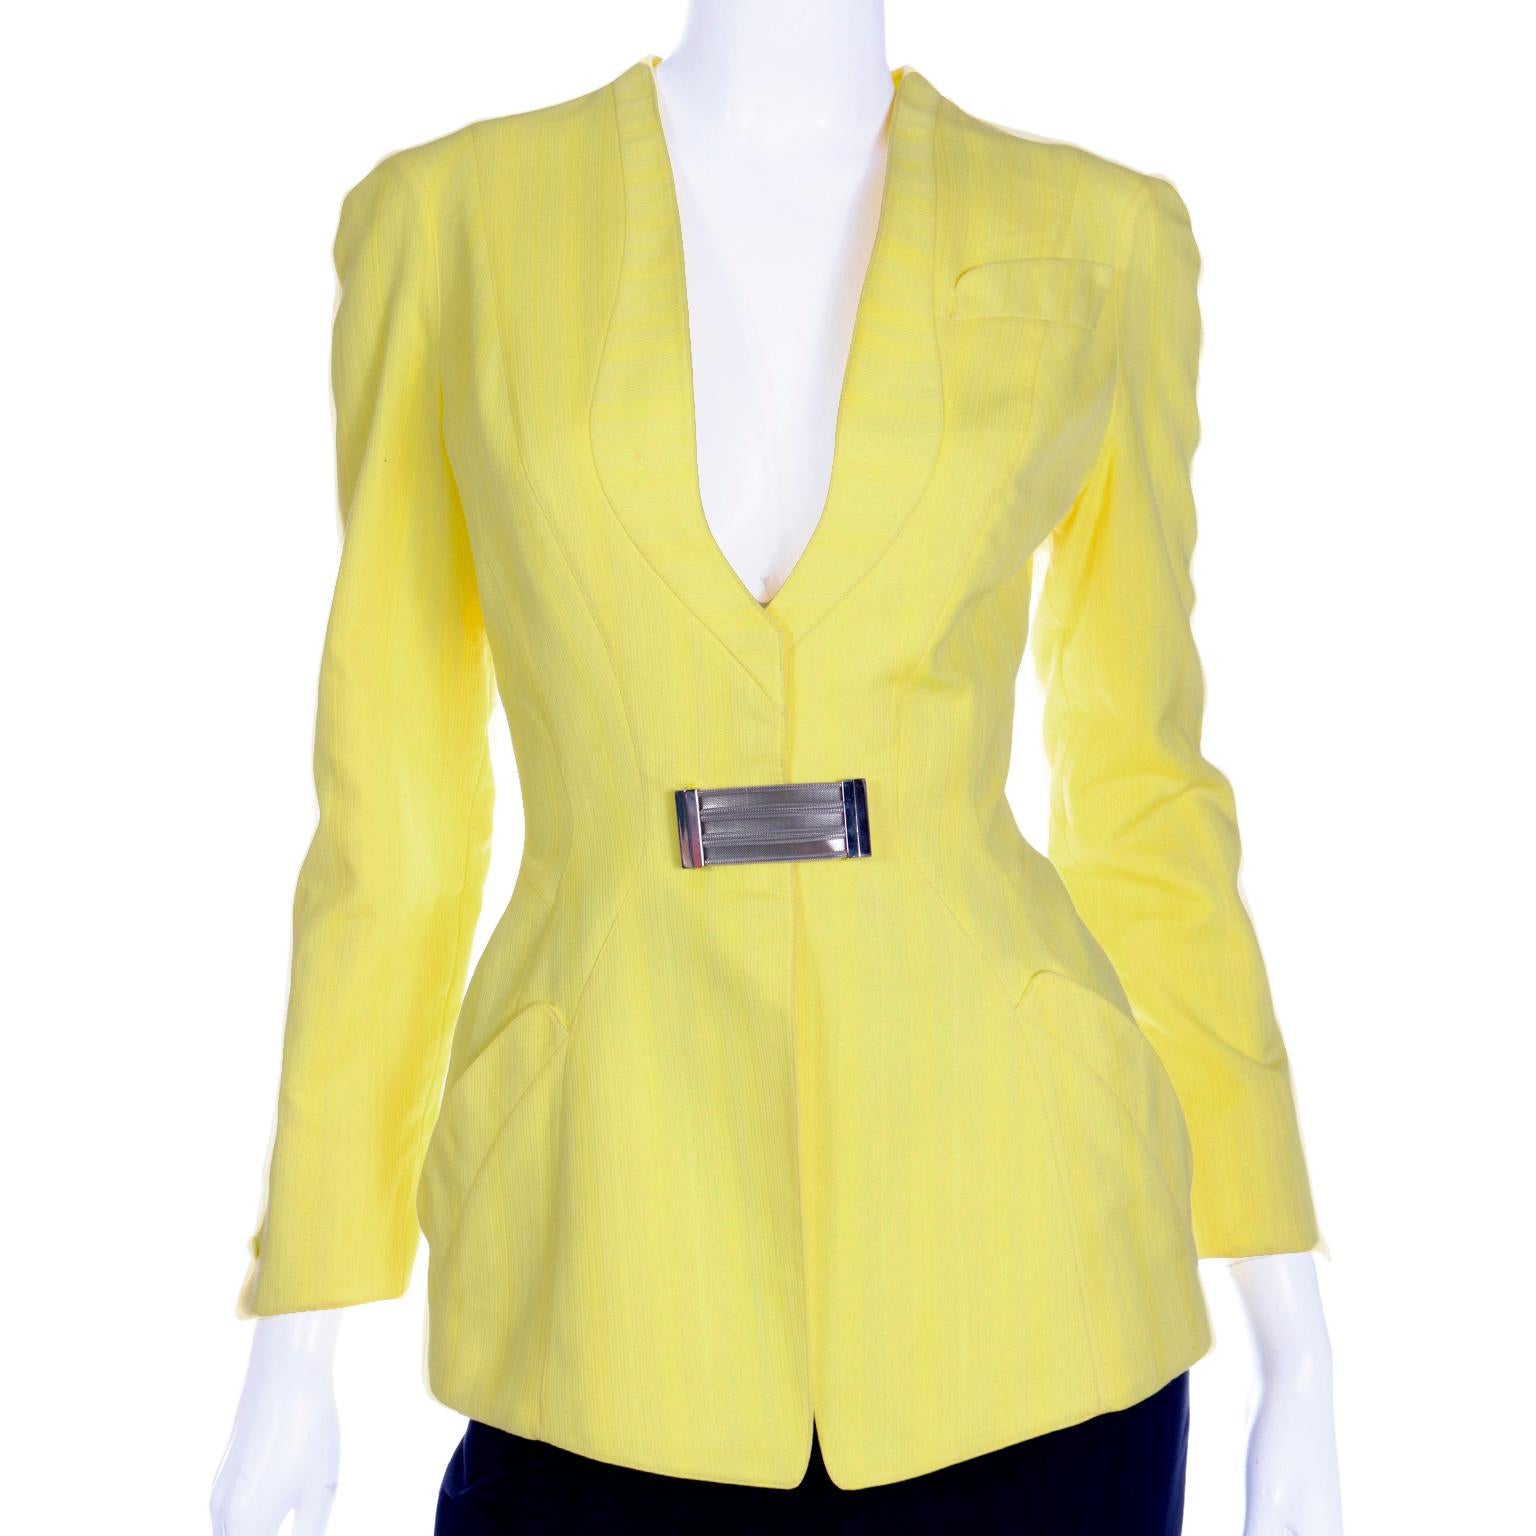 Vintage Thierry Mugler Tonal Striped Yellow Jacket and Black Pencil Skirt Suit For Sale 2